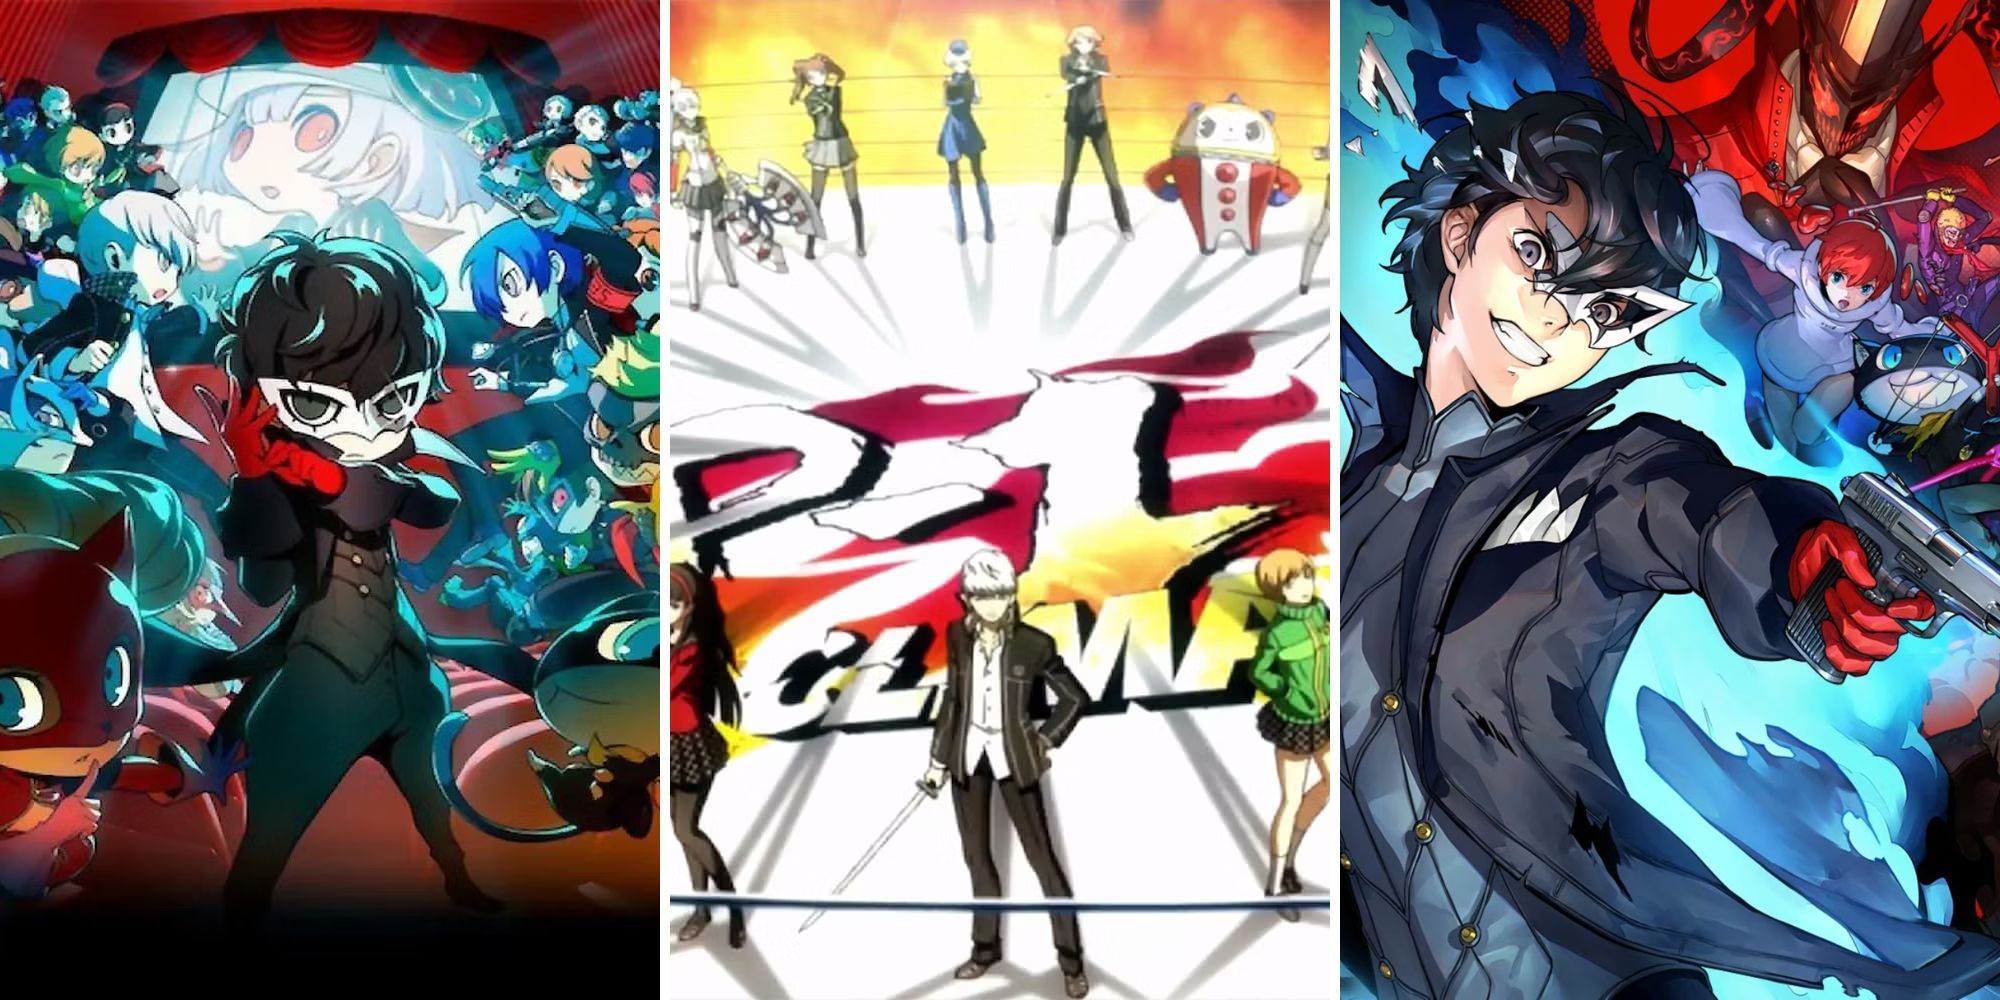 Persona Q2, Arena Ultimax, And Persona 5 Strikers Images